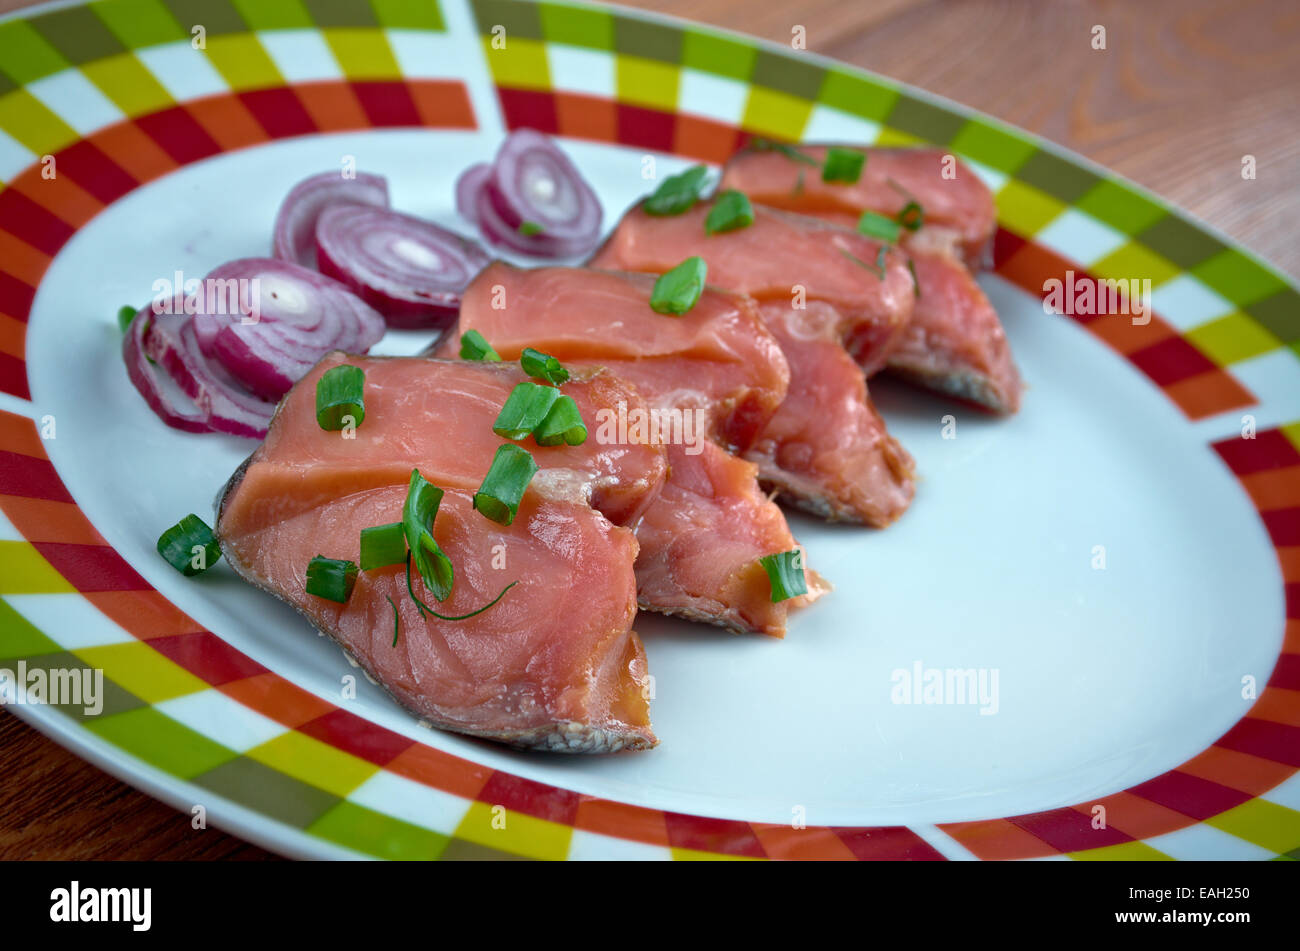 Rakfisk - Norwegian fish dish made from trout or sometimes char, salted and fermented Stock Photo